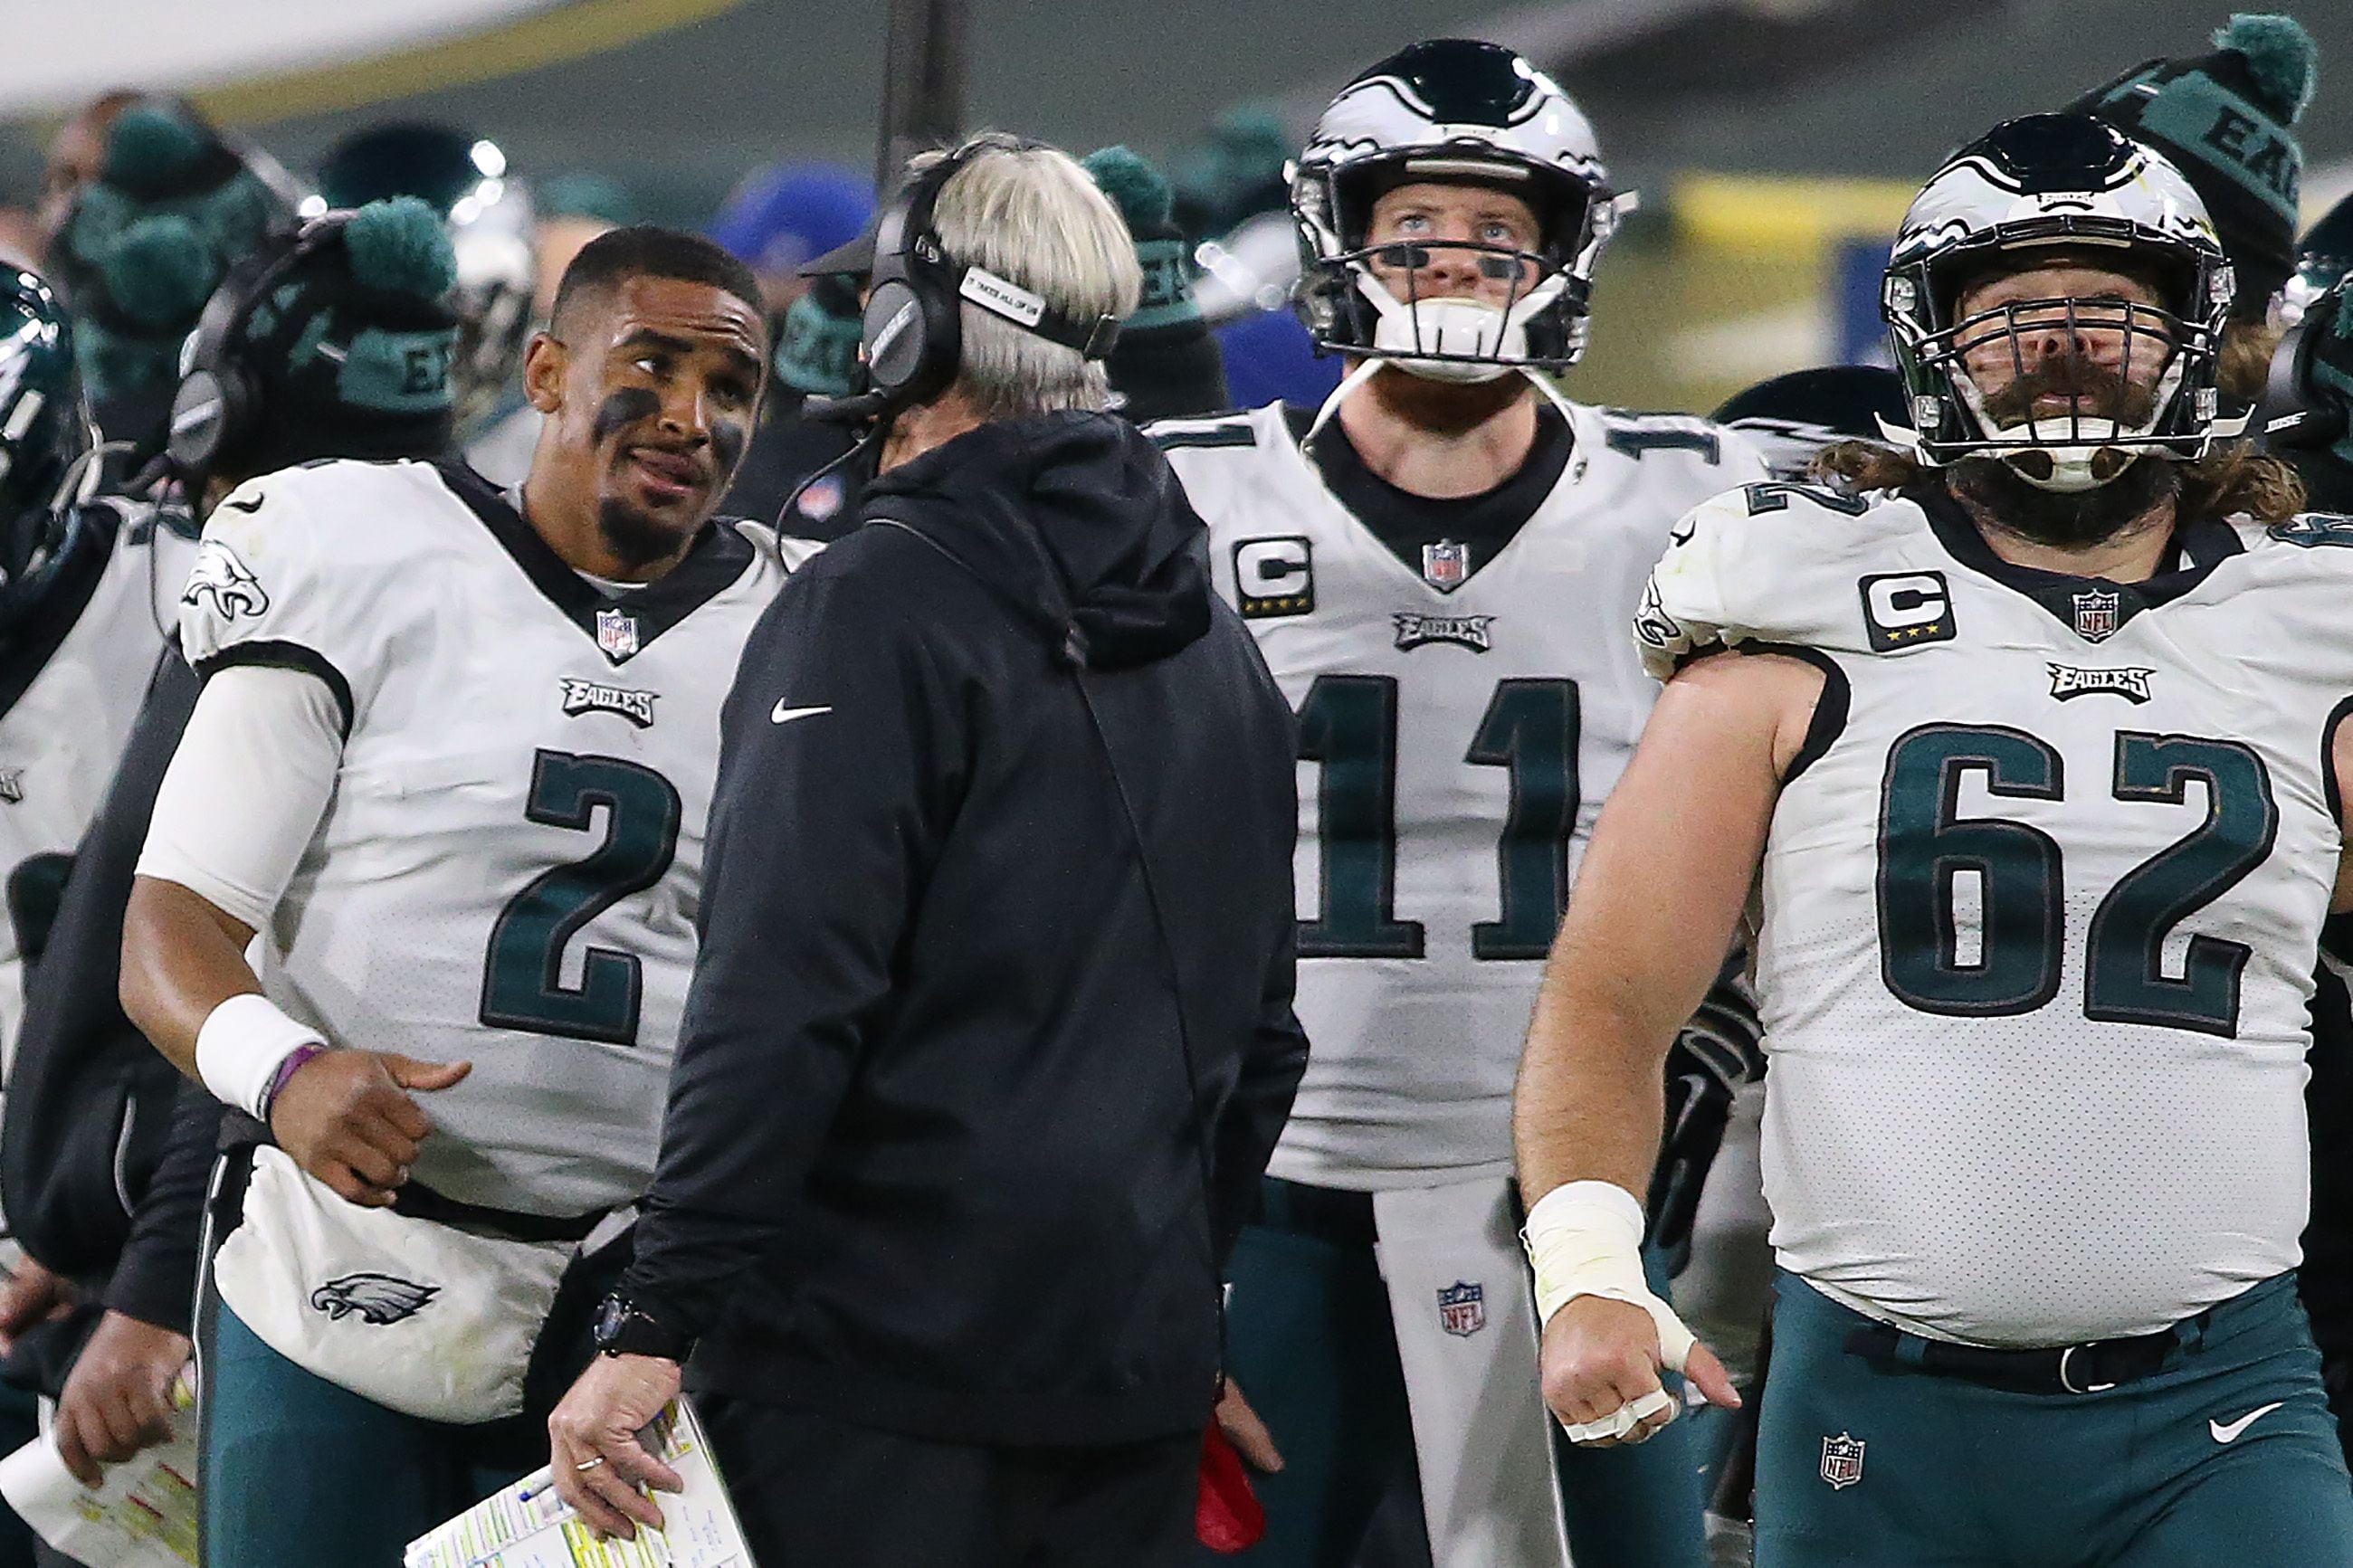 Short day for Eagles' Carson Wentz after long wait for his first